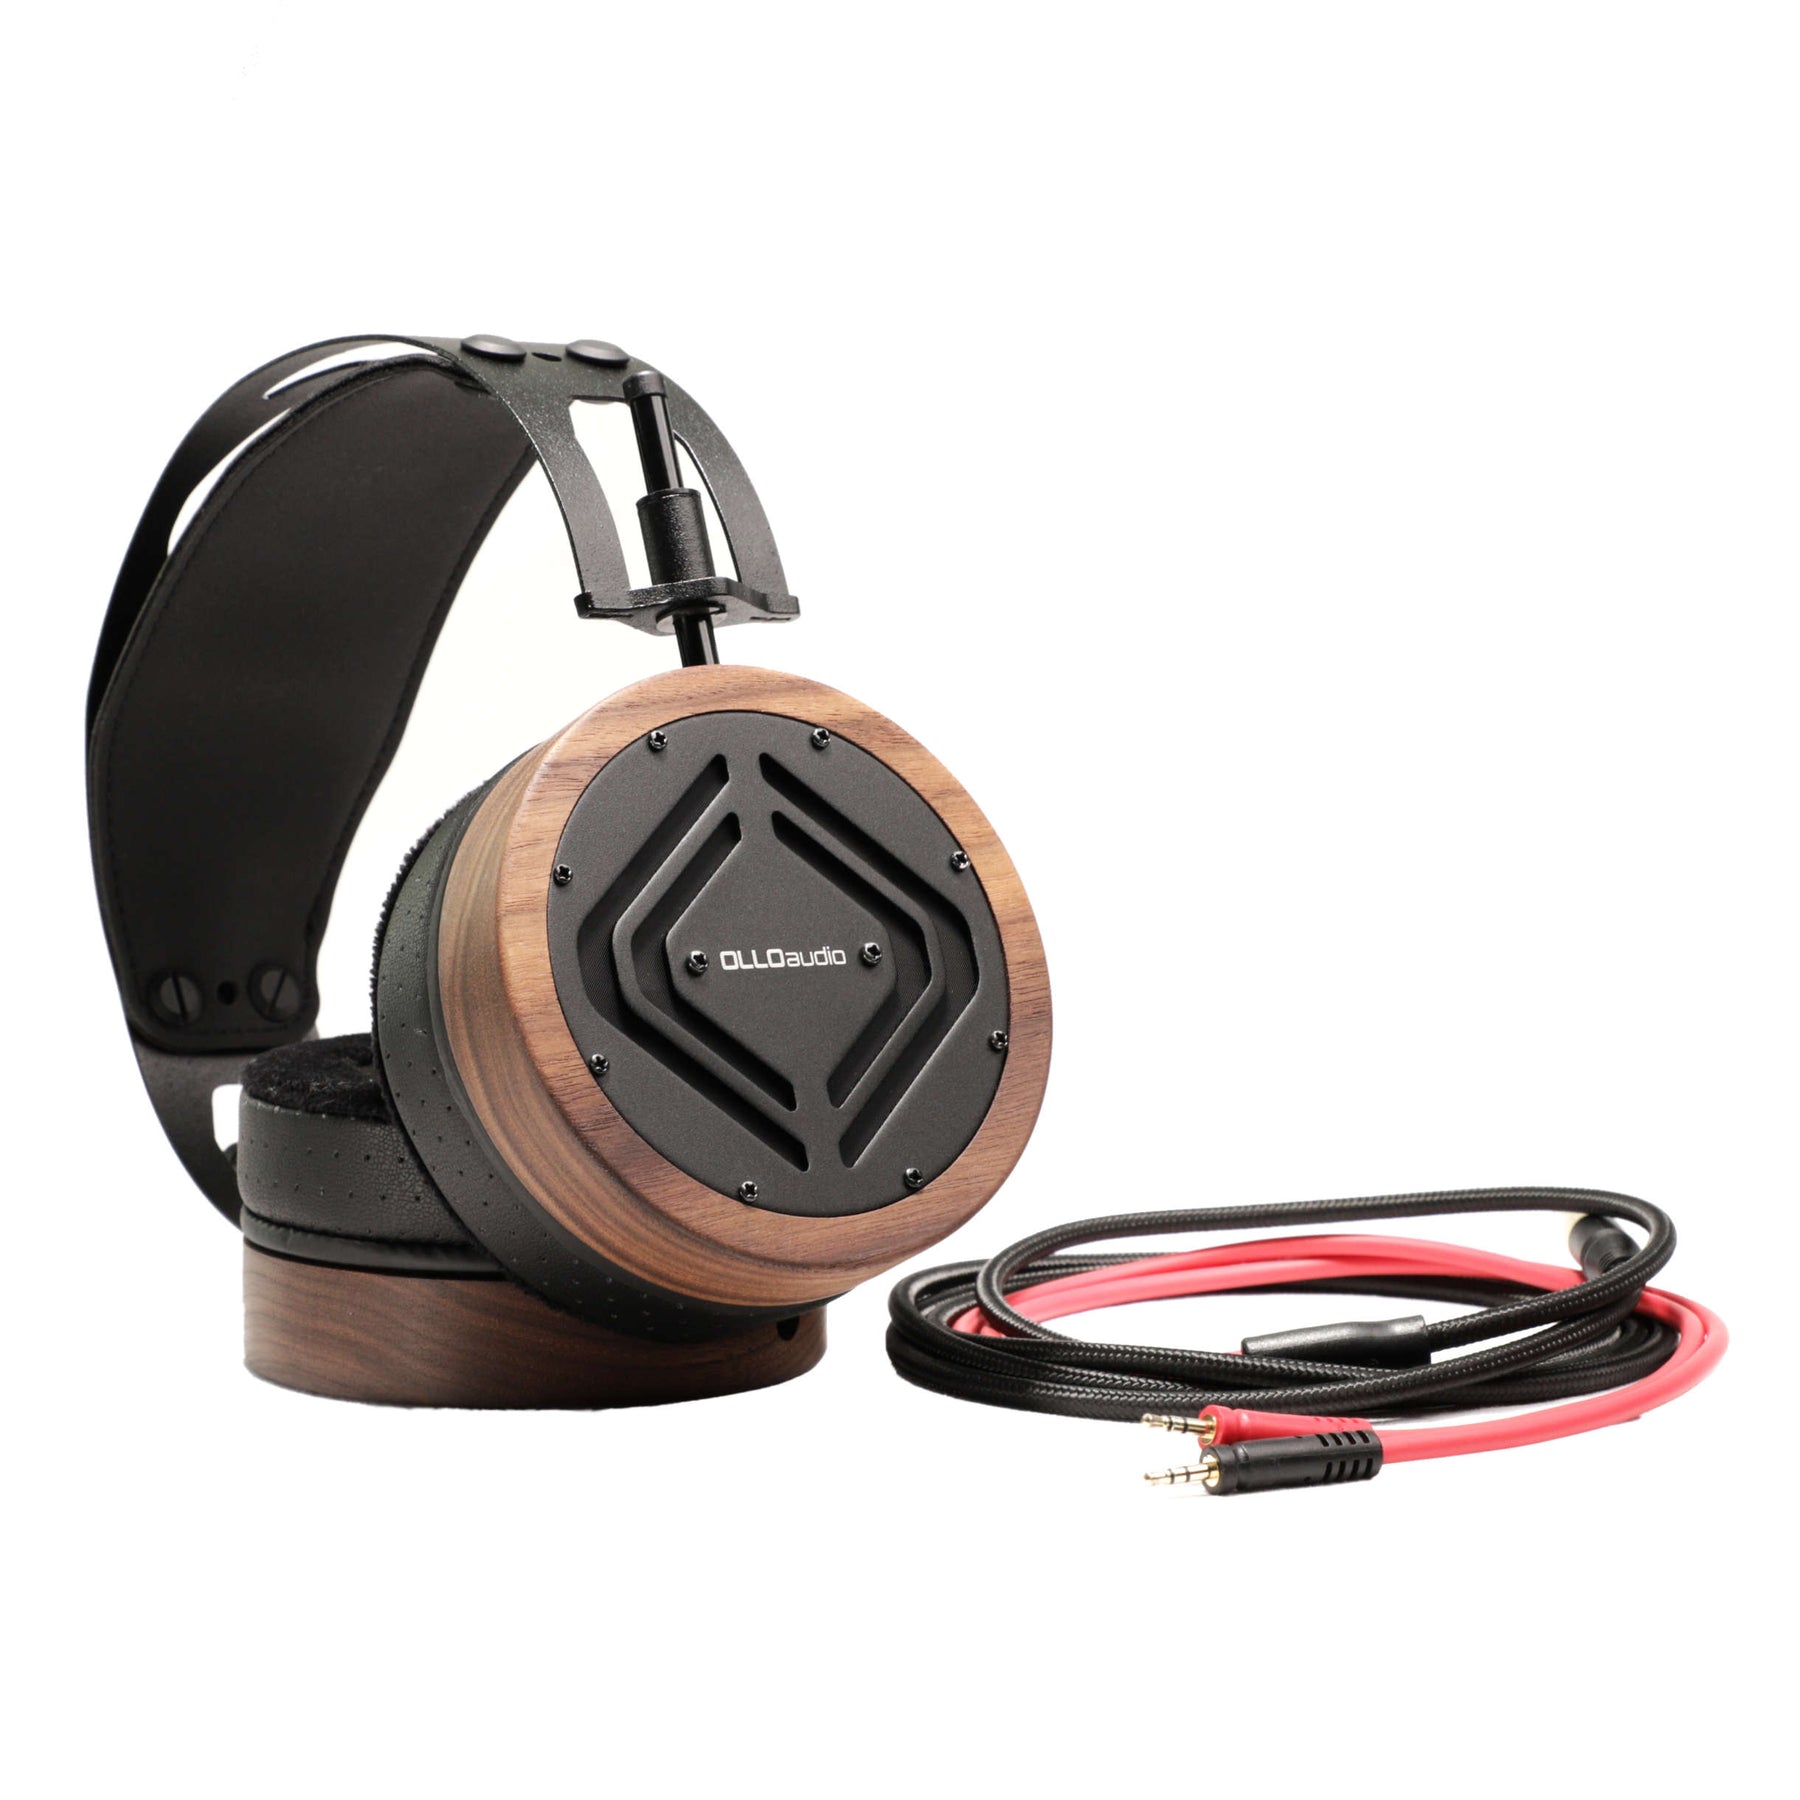 S5X headphones for mixing spatial audio e.g. Dolby Atmos or Sony